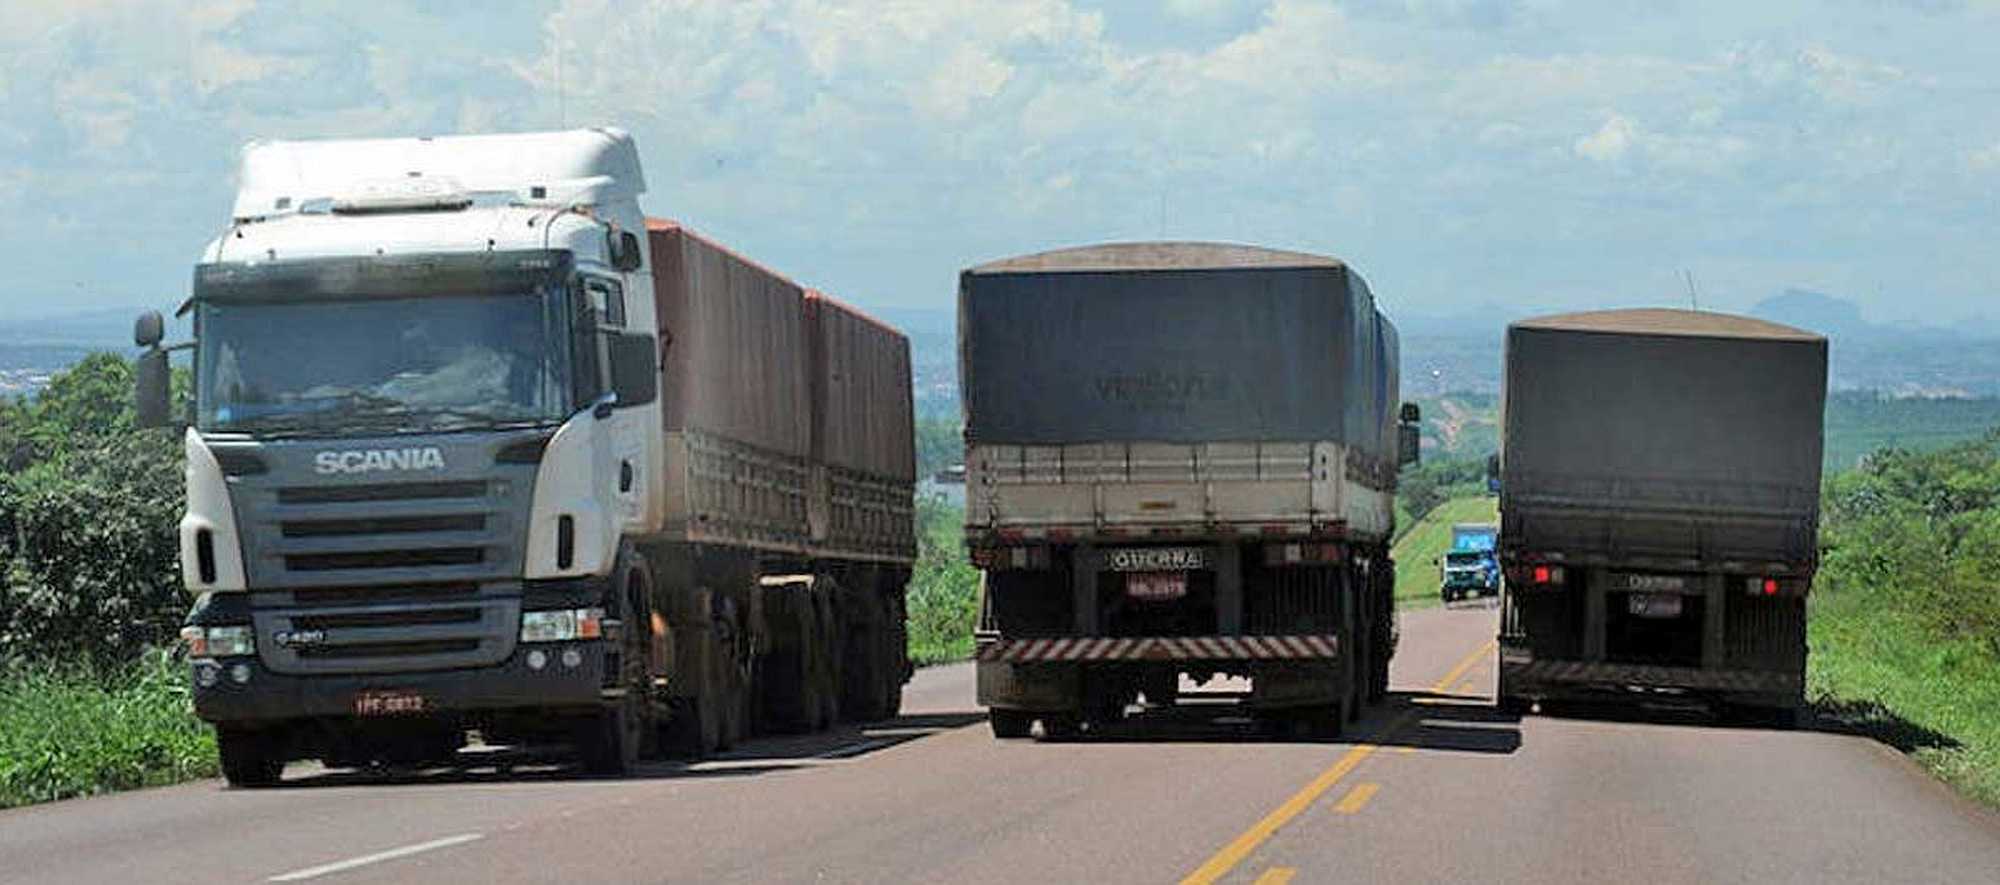 Commodities on the move on the completed southern section of the BR-163 Highway - Roosevelt Pinheiro / Agência Brasil